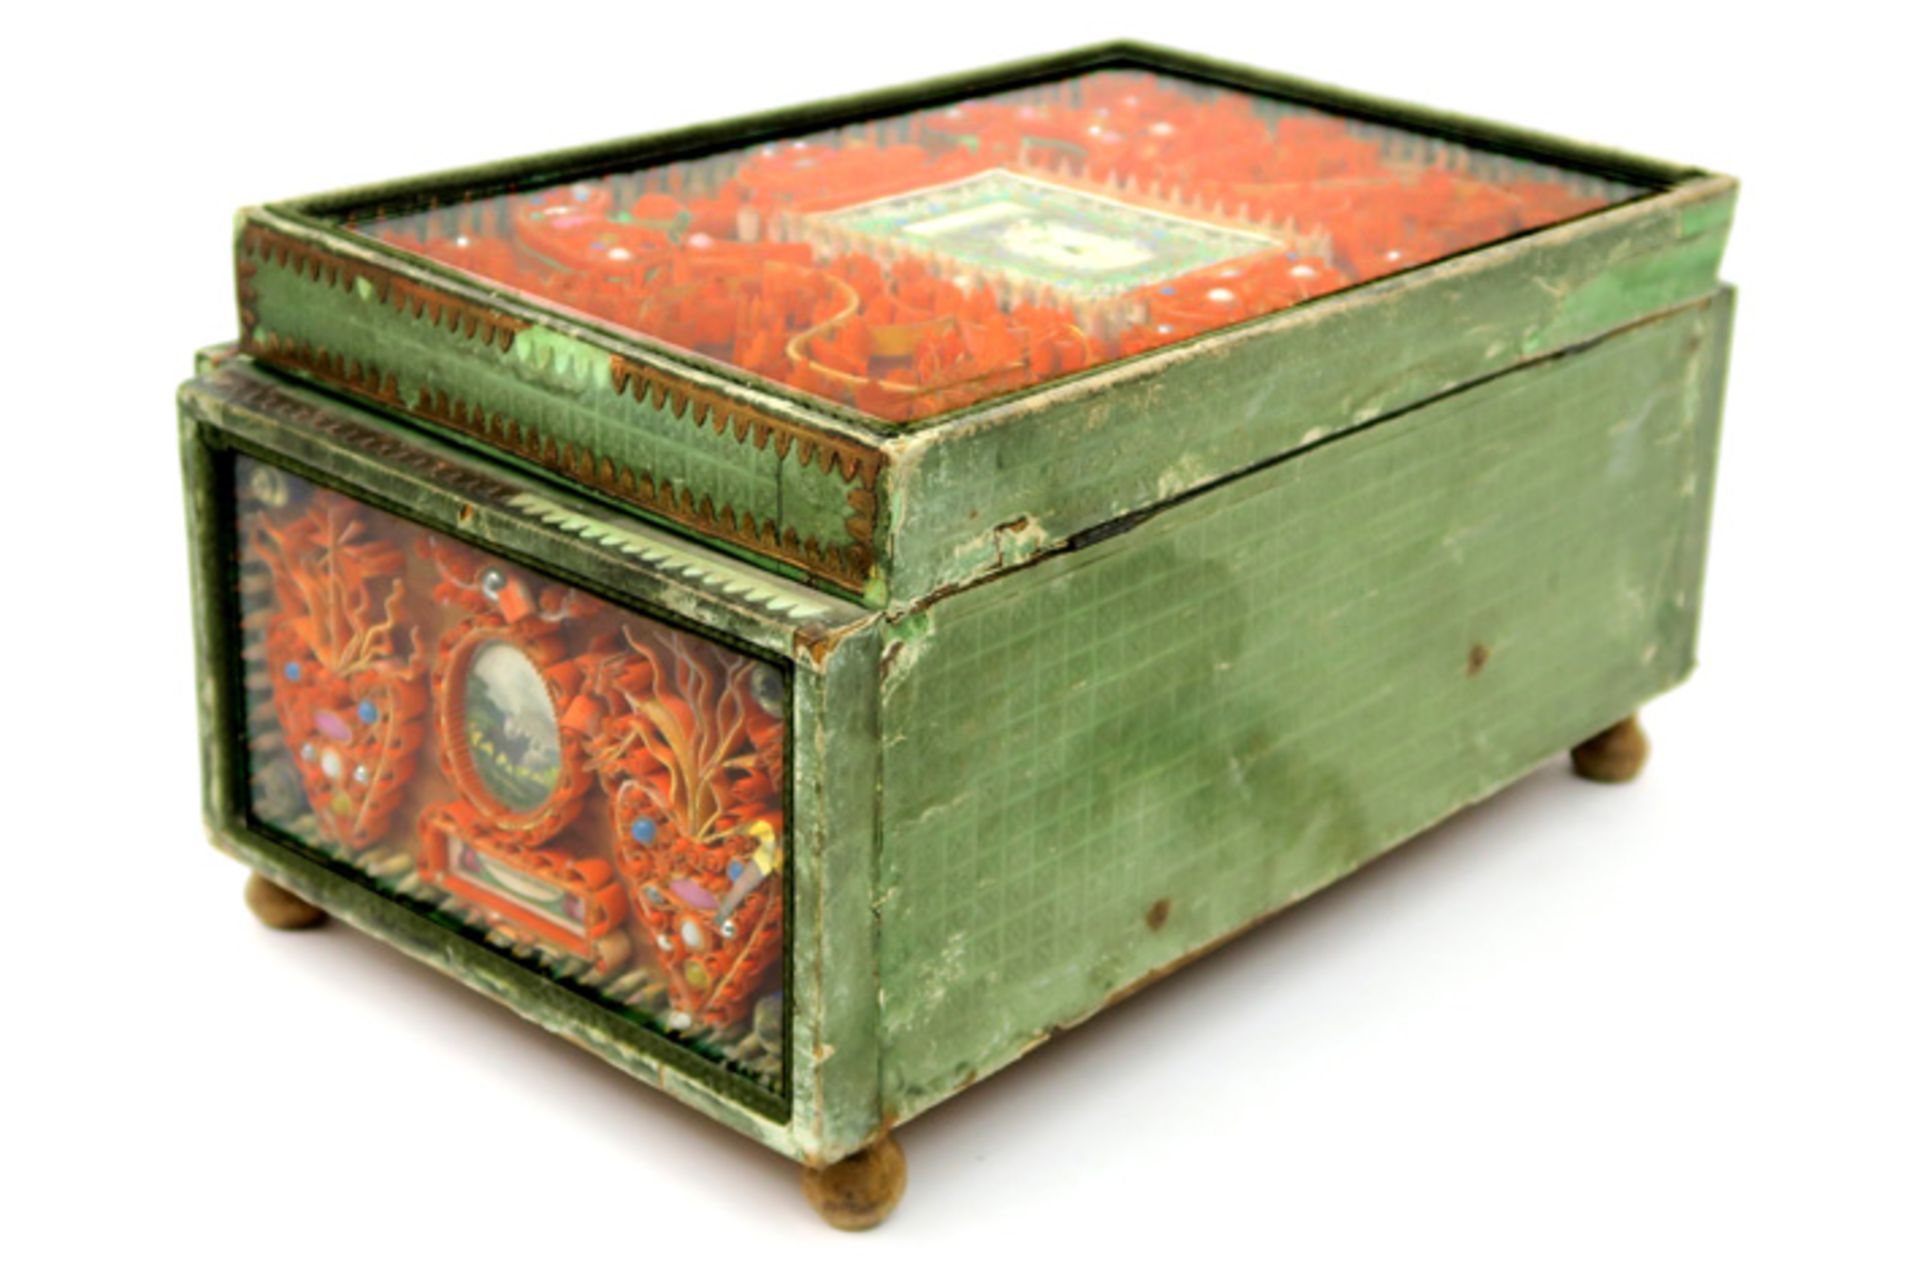 19th "Folk Art" box in painted wood and glass with relics VOLKSKUNST - 19° EEUW kistje in - Image 5 of 5